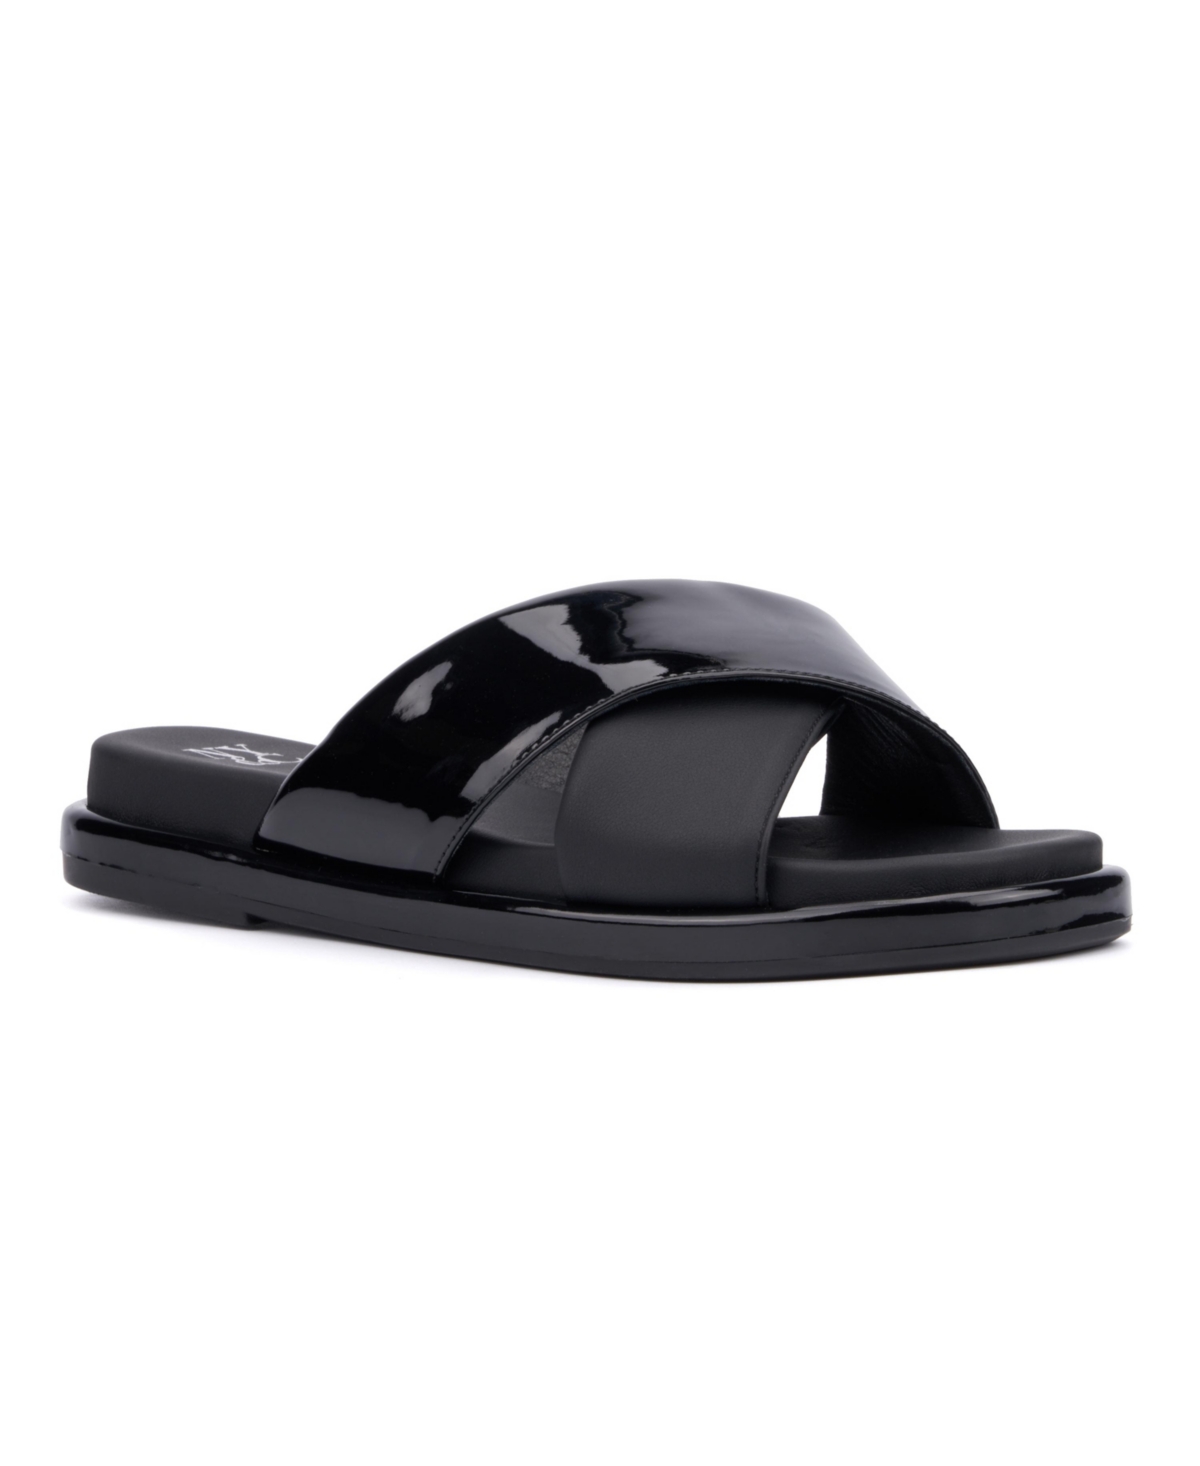 NEW YORK AND COMPANY WOMEN'S GERALYN FLAT SANDAL